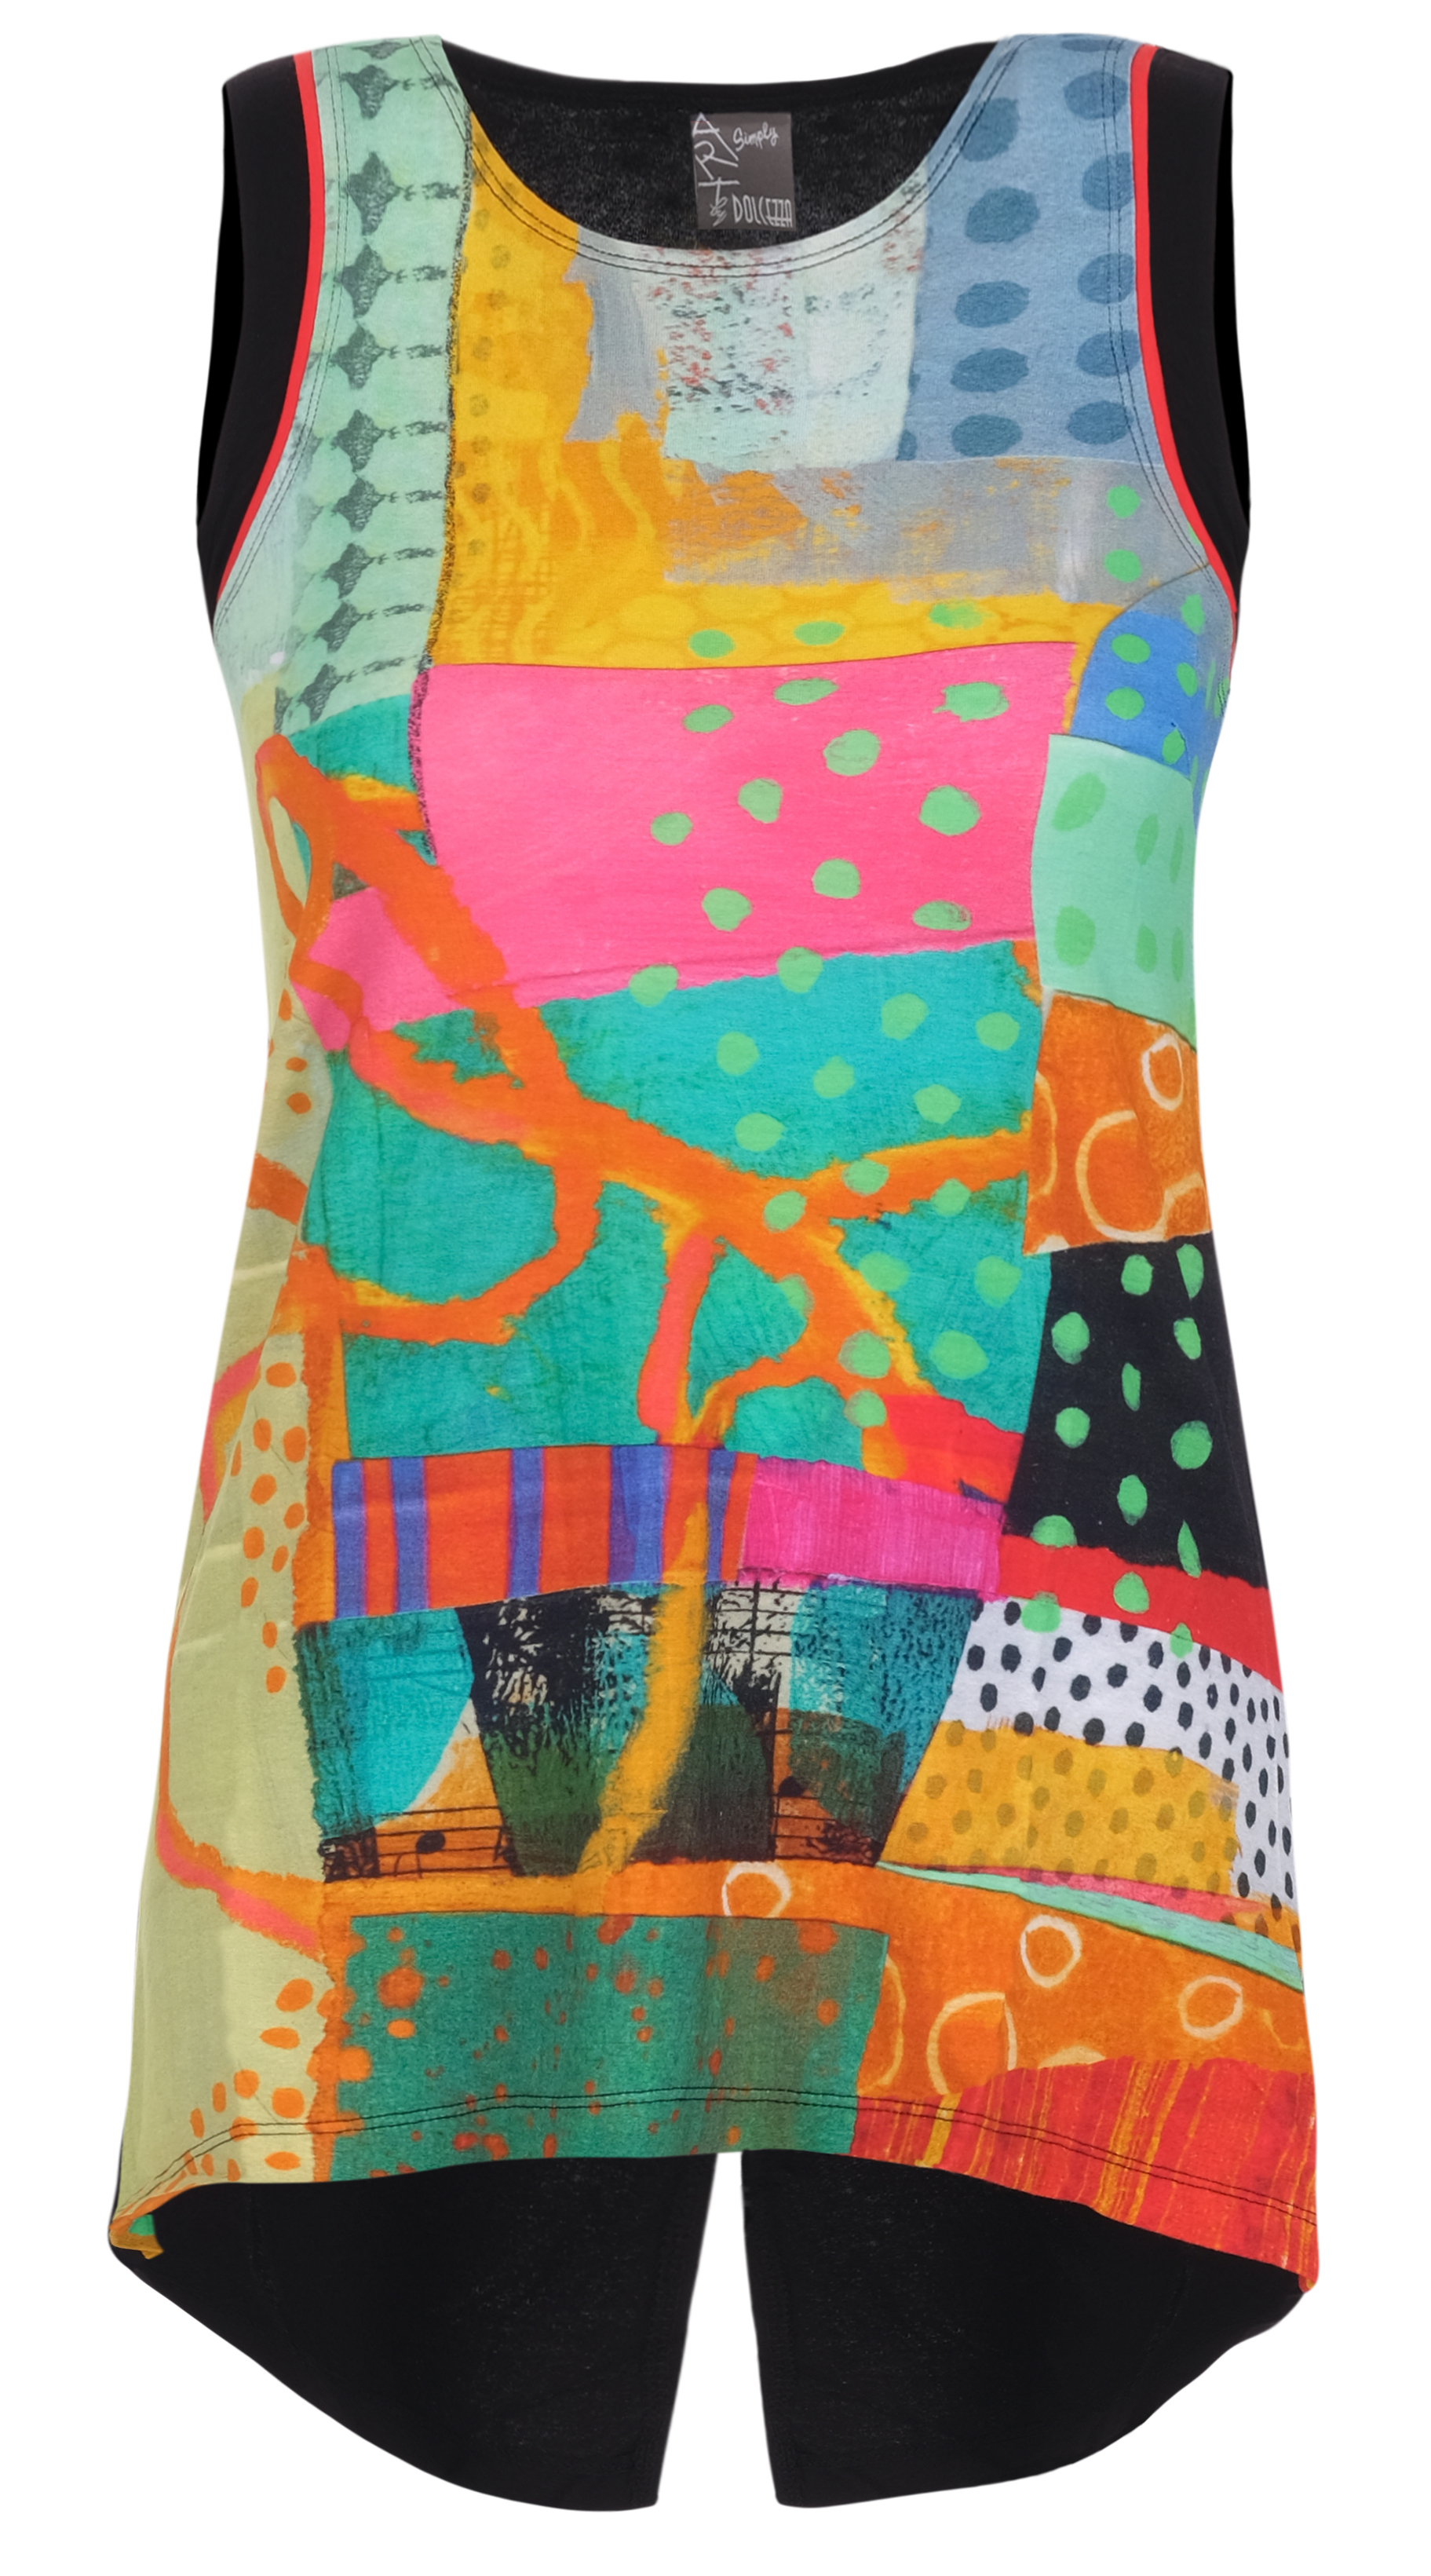 Simply Art Dolcezza: Leisurely Love Stowe In October Abstract Art Split Tunic (2 Left!) Dolcezza_SimplyArt_21652